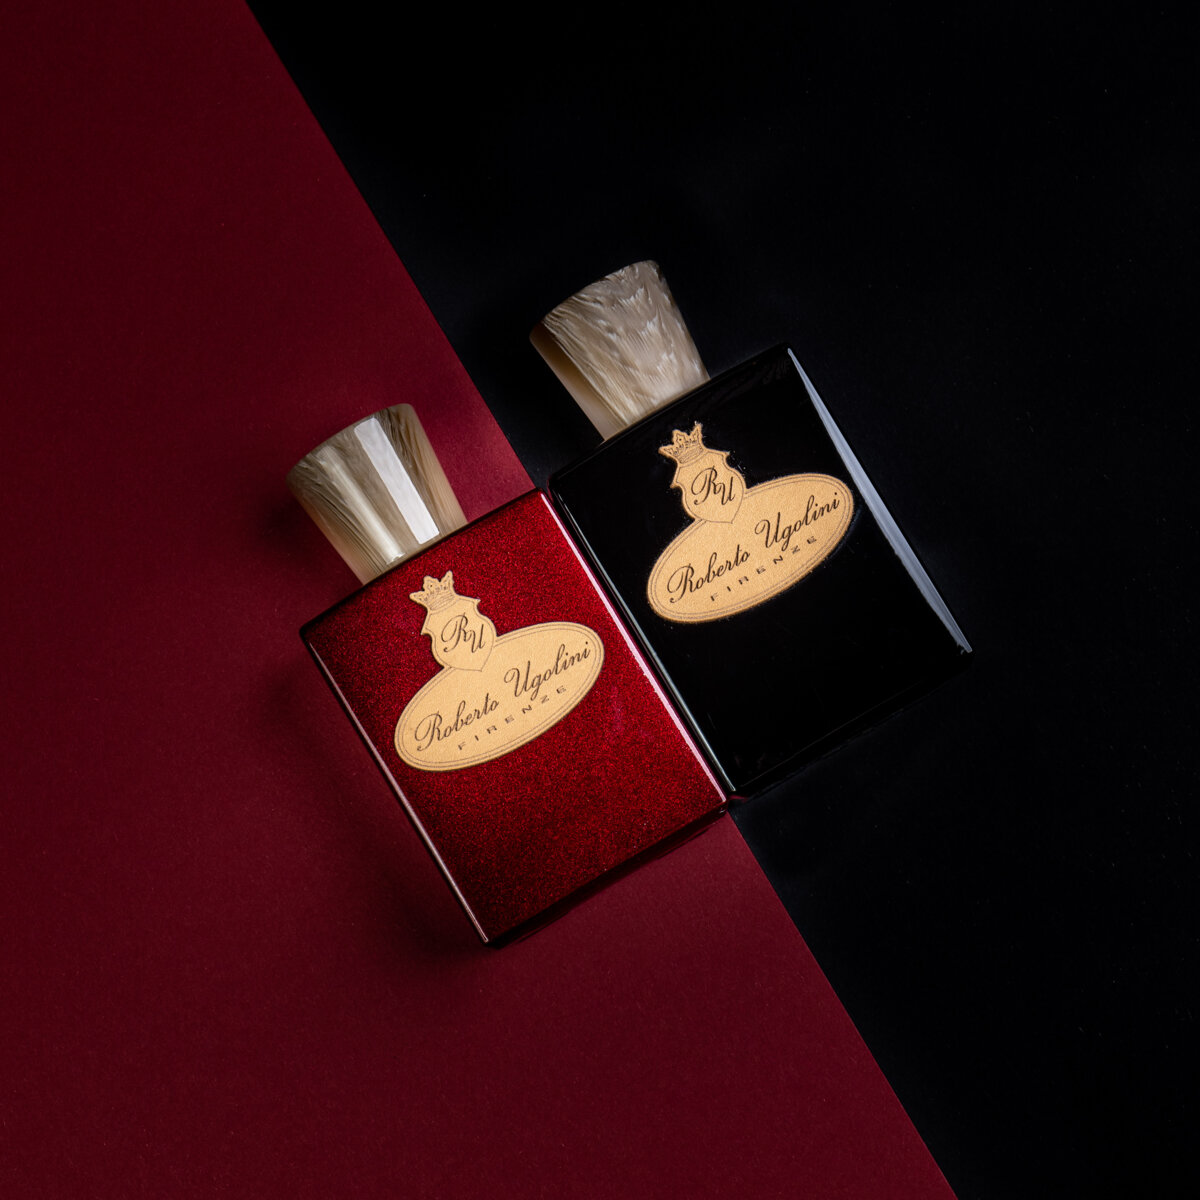 Roberto Ugolini Fragrance bottles in full-size Derby and 17 Rosso